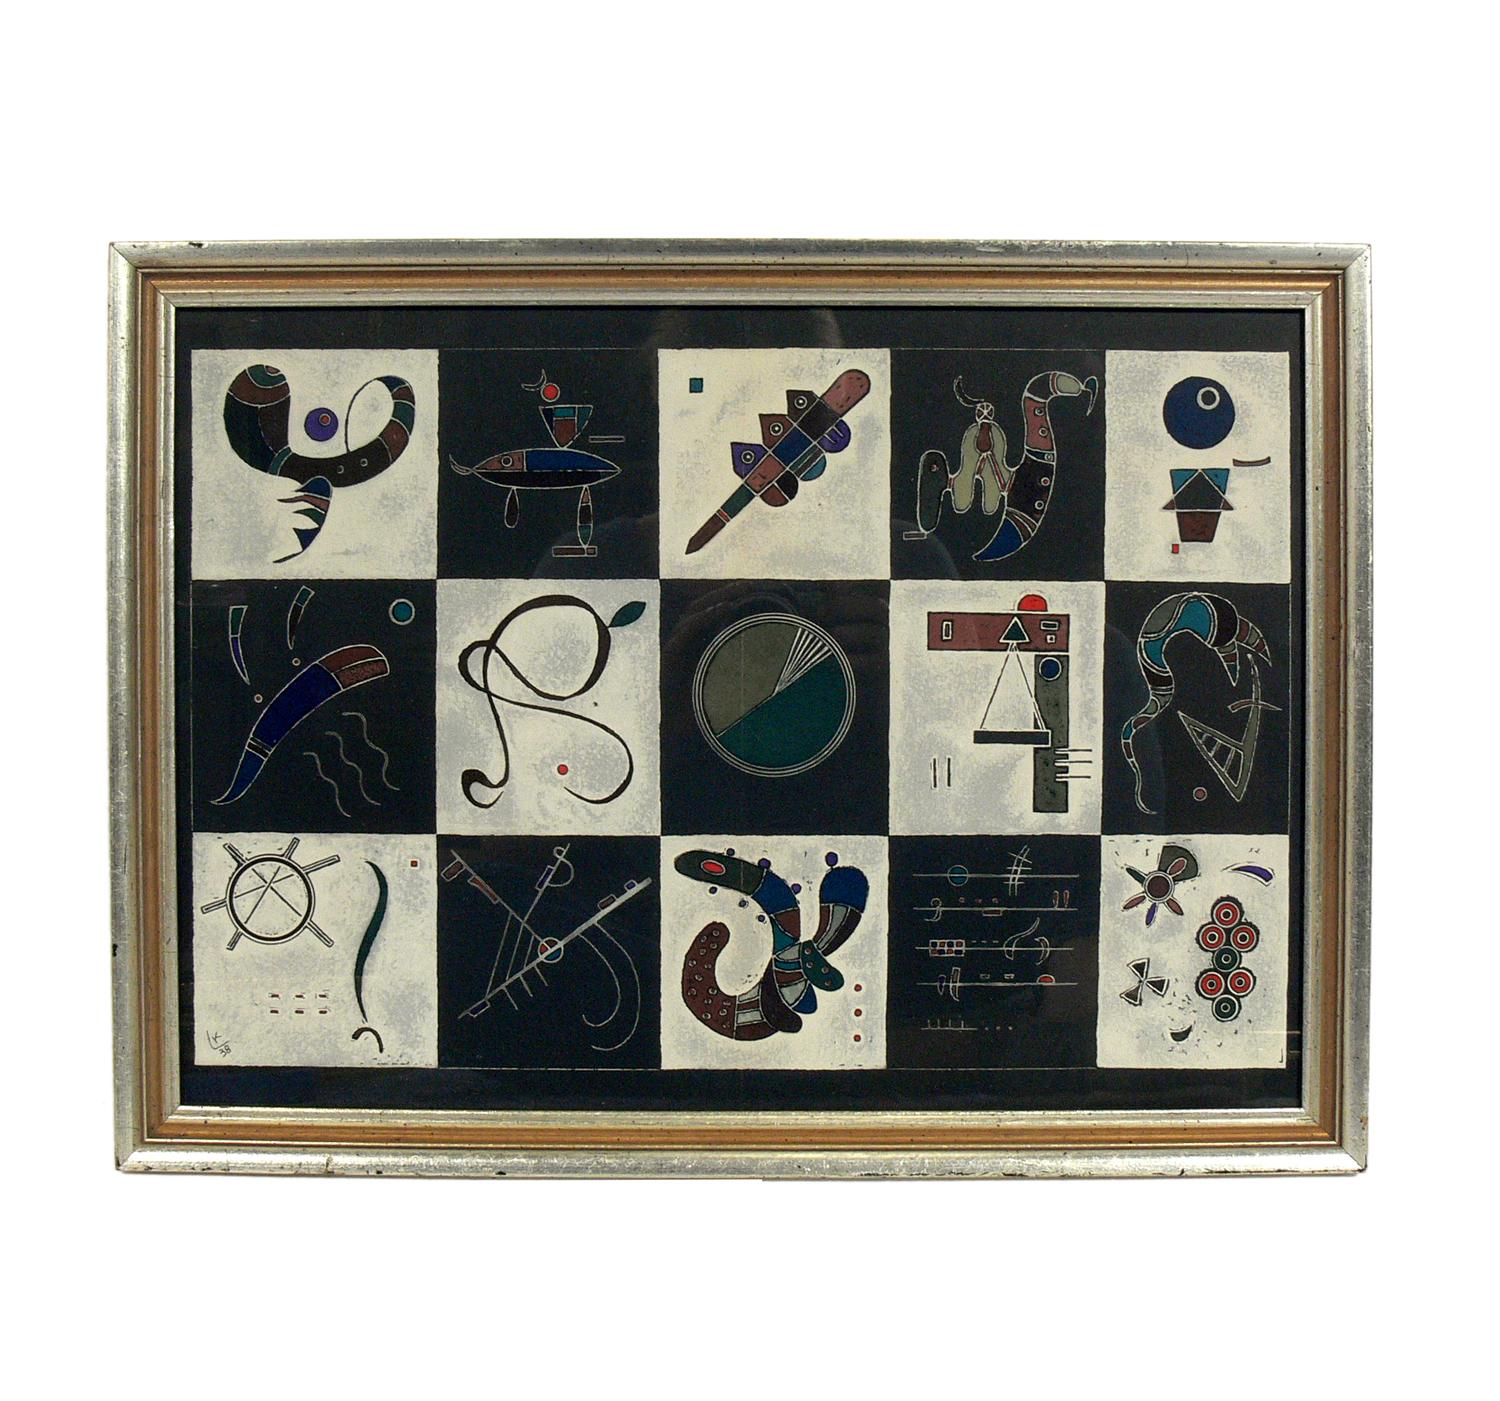 Selection of Wassily Kandinsky lithographs or gallery wall, circa 1960s. The lithograph pictured on the top left measures 15